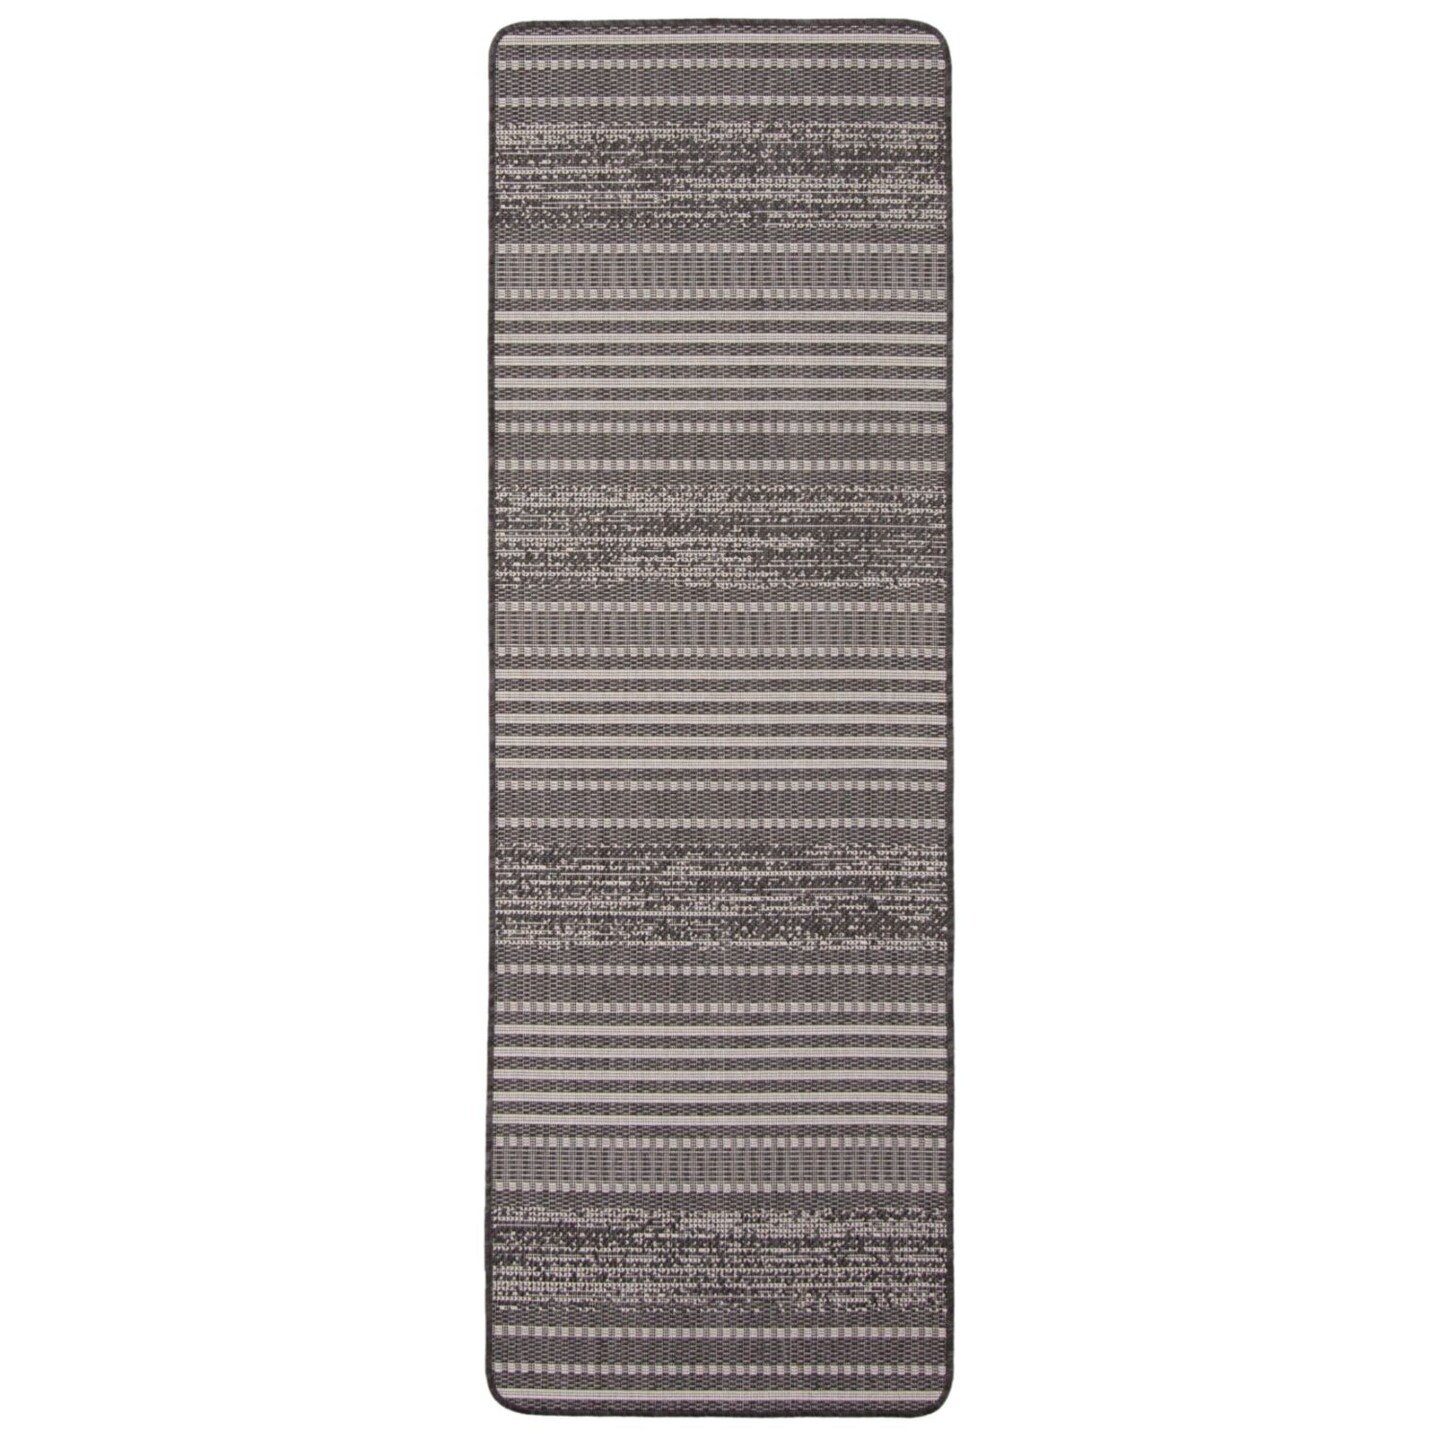 Chaudhary Living 2&#x27; x 6.5&#x27; Black and Gray Striped Rectangular Outdoor Area Throw Rug Runner